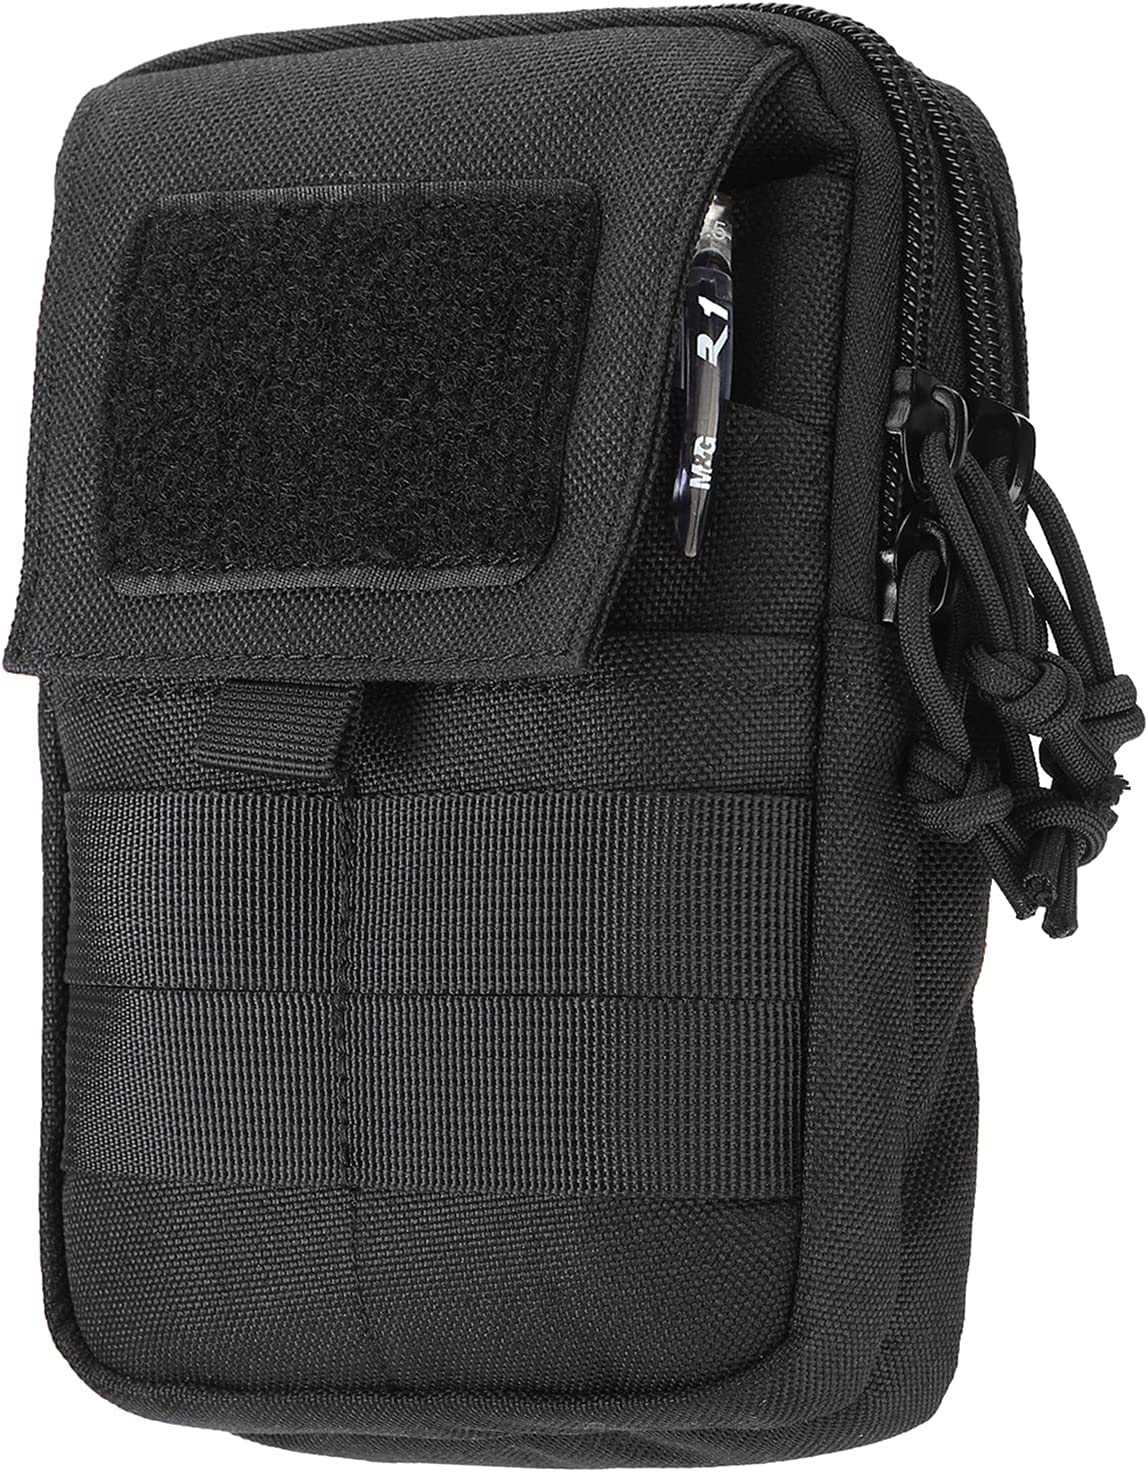 LefRight Multipurpose Tactical Molle Mobile Phone Belt Pouch EDC Gadget Slim Utility Waist Bag with Cellphone Holster Large Black